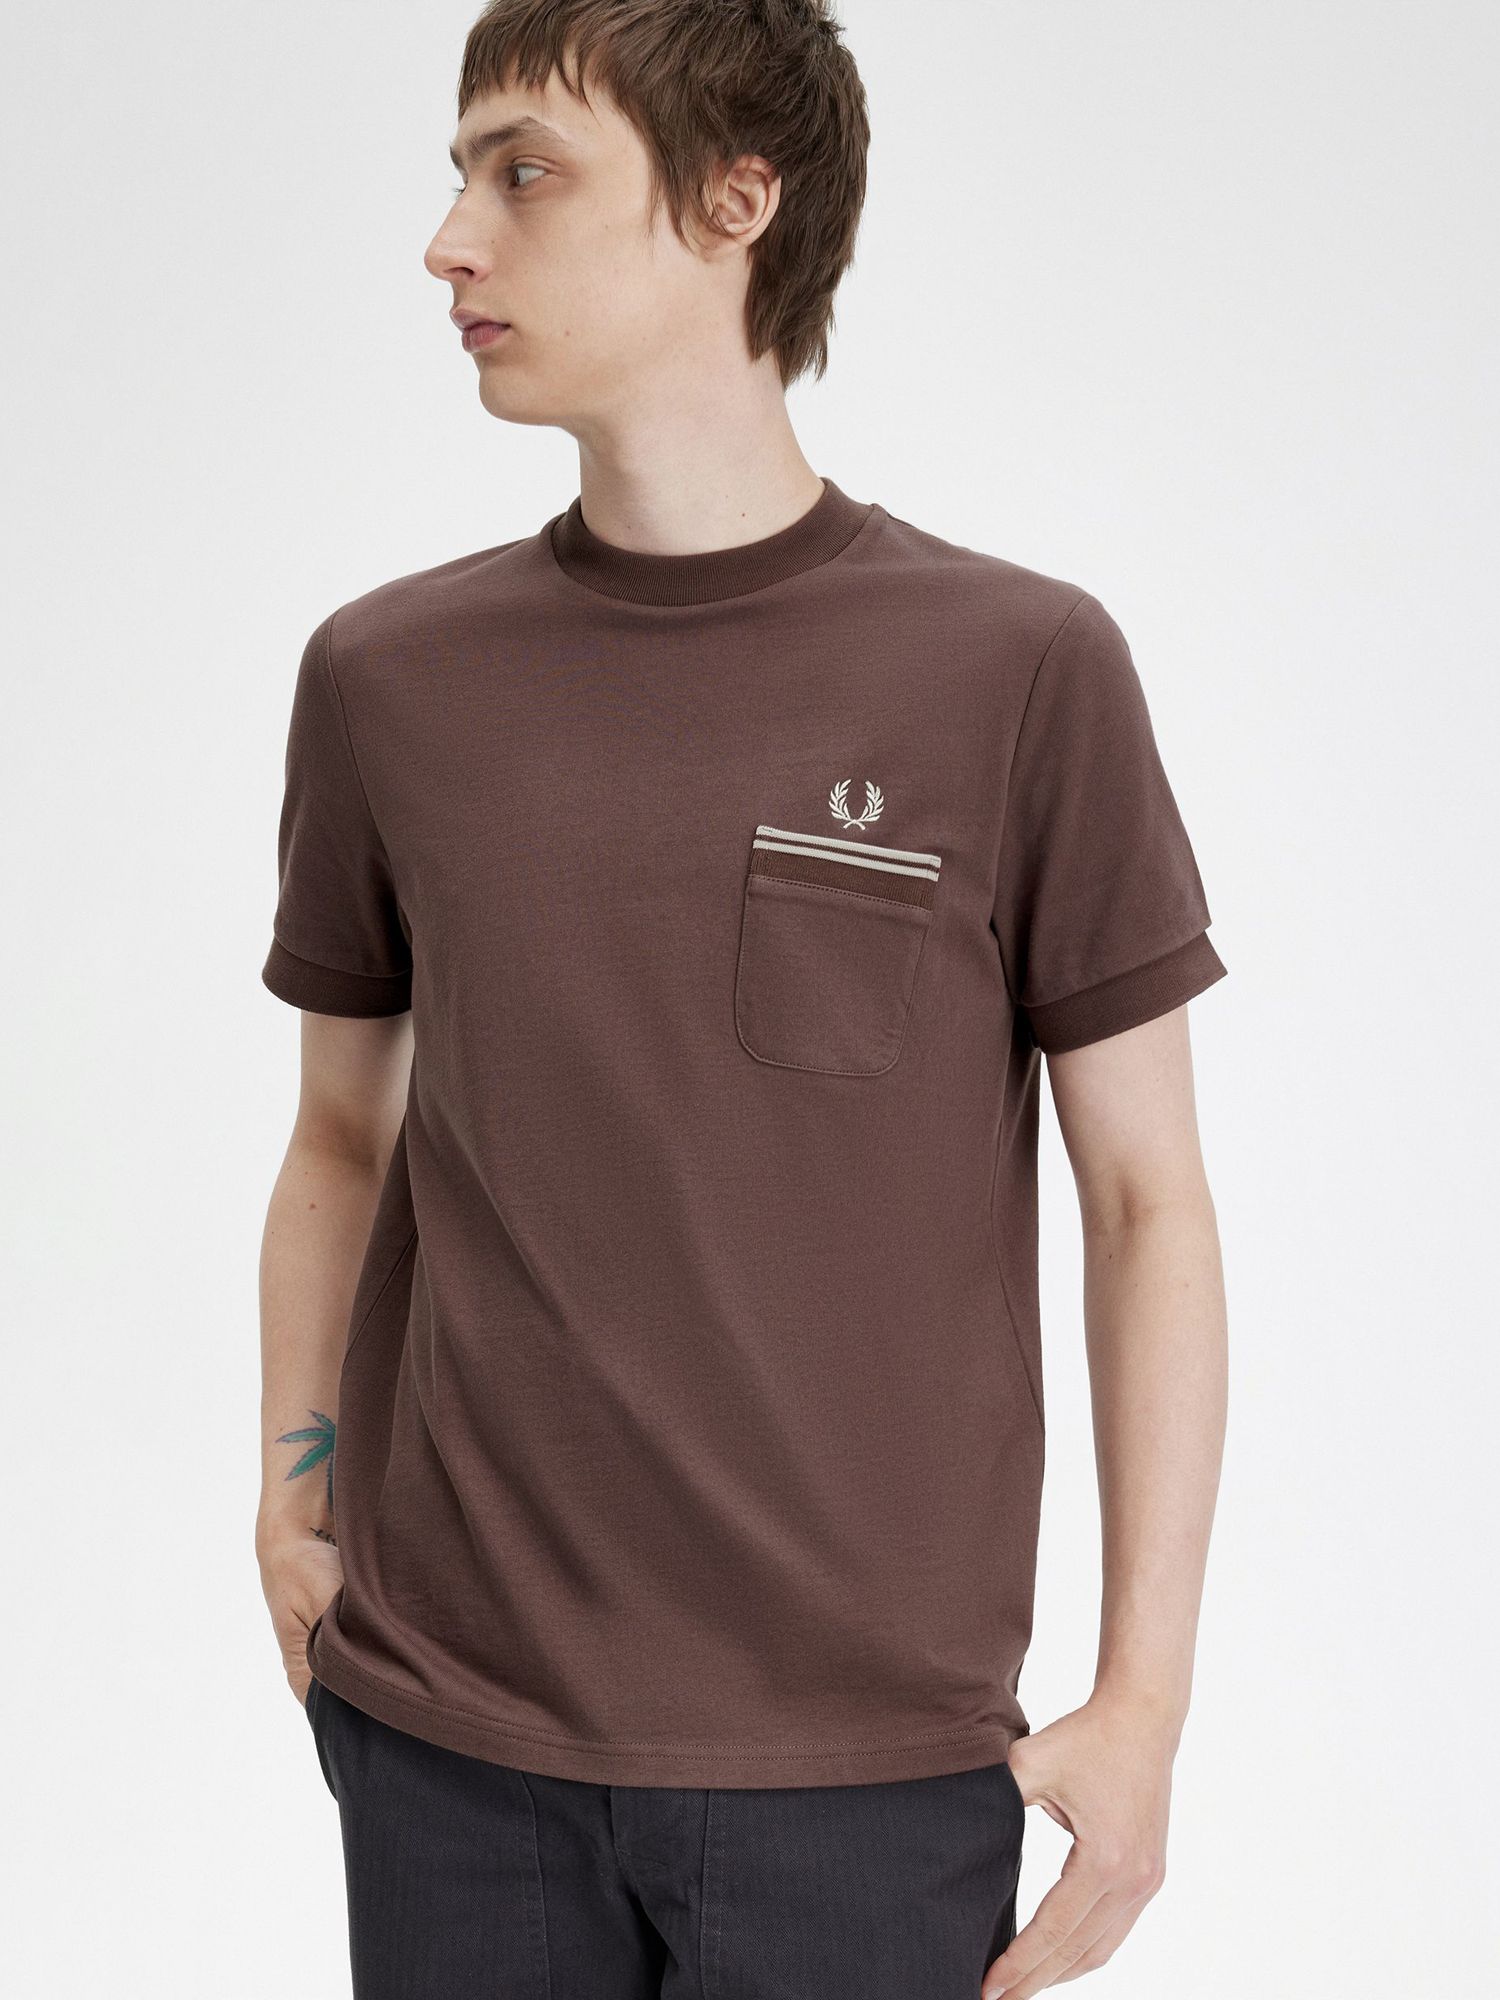 Fred Perry Cotton Crew Neck T-Shirt, Red, M